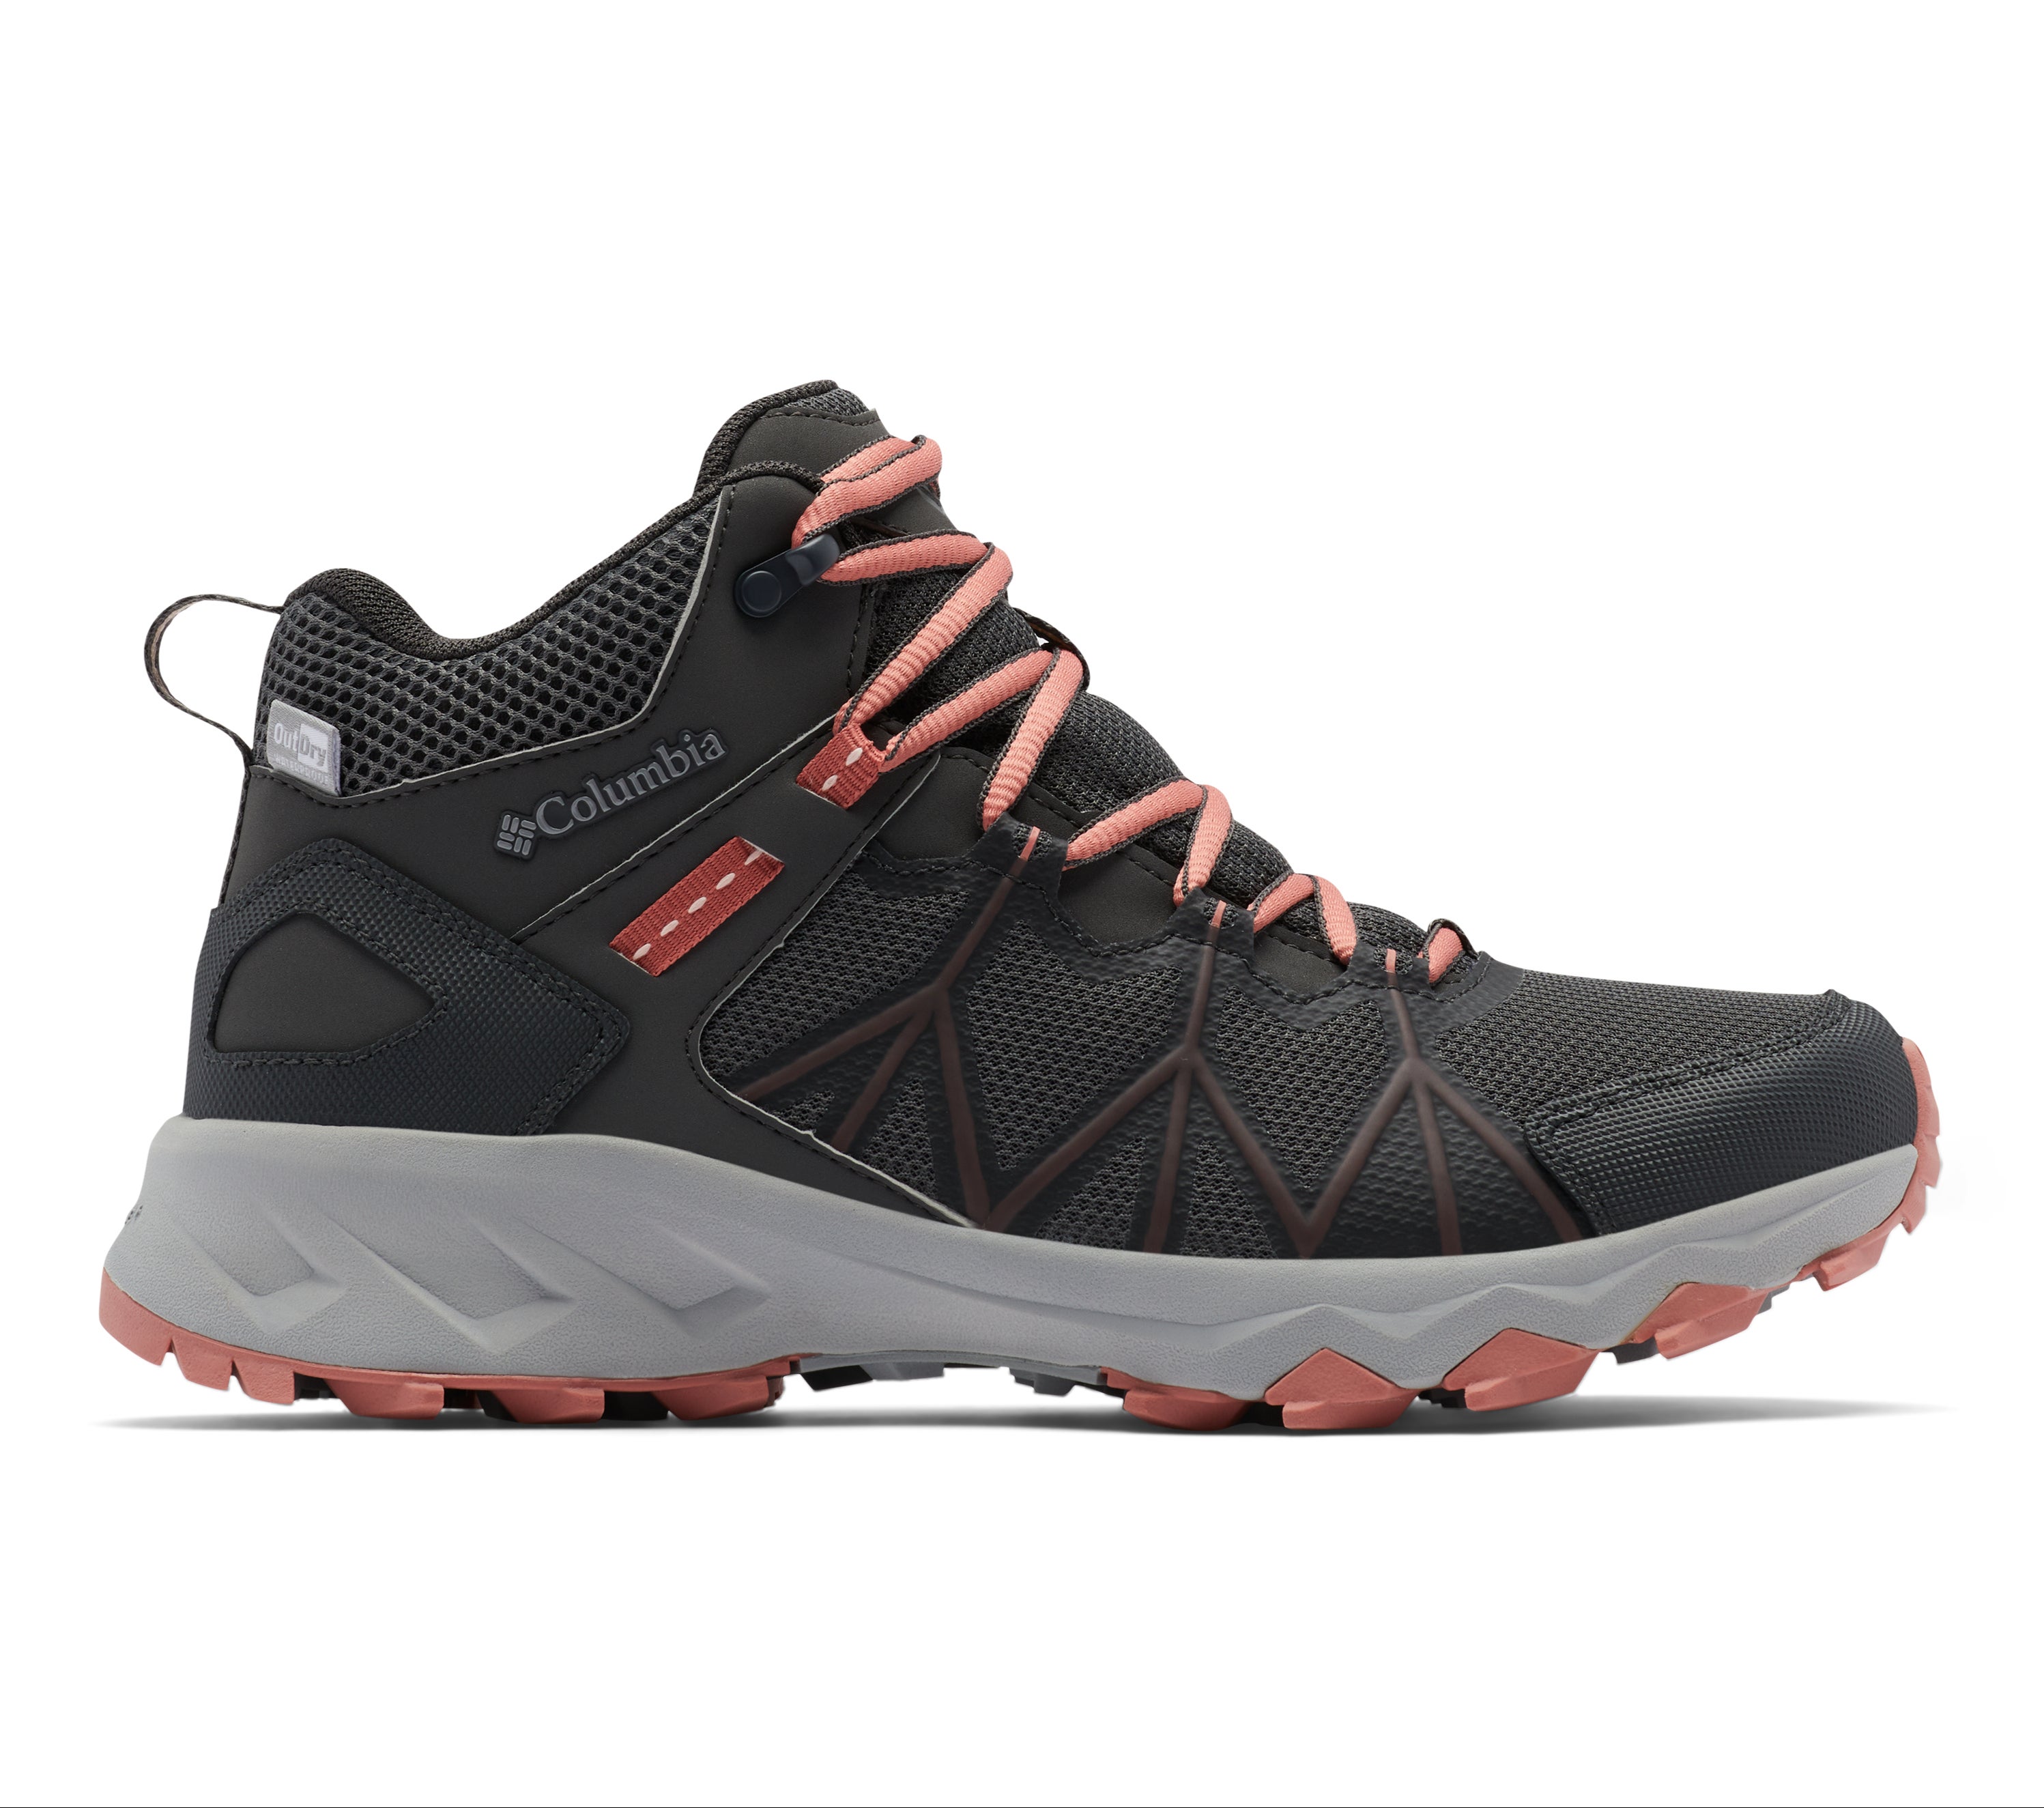 IndyBest Columbia hiking boots